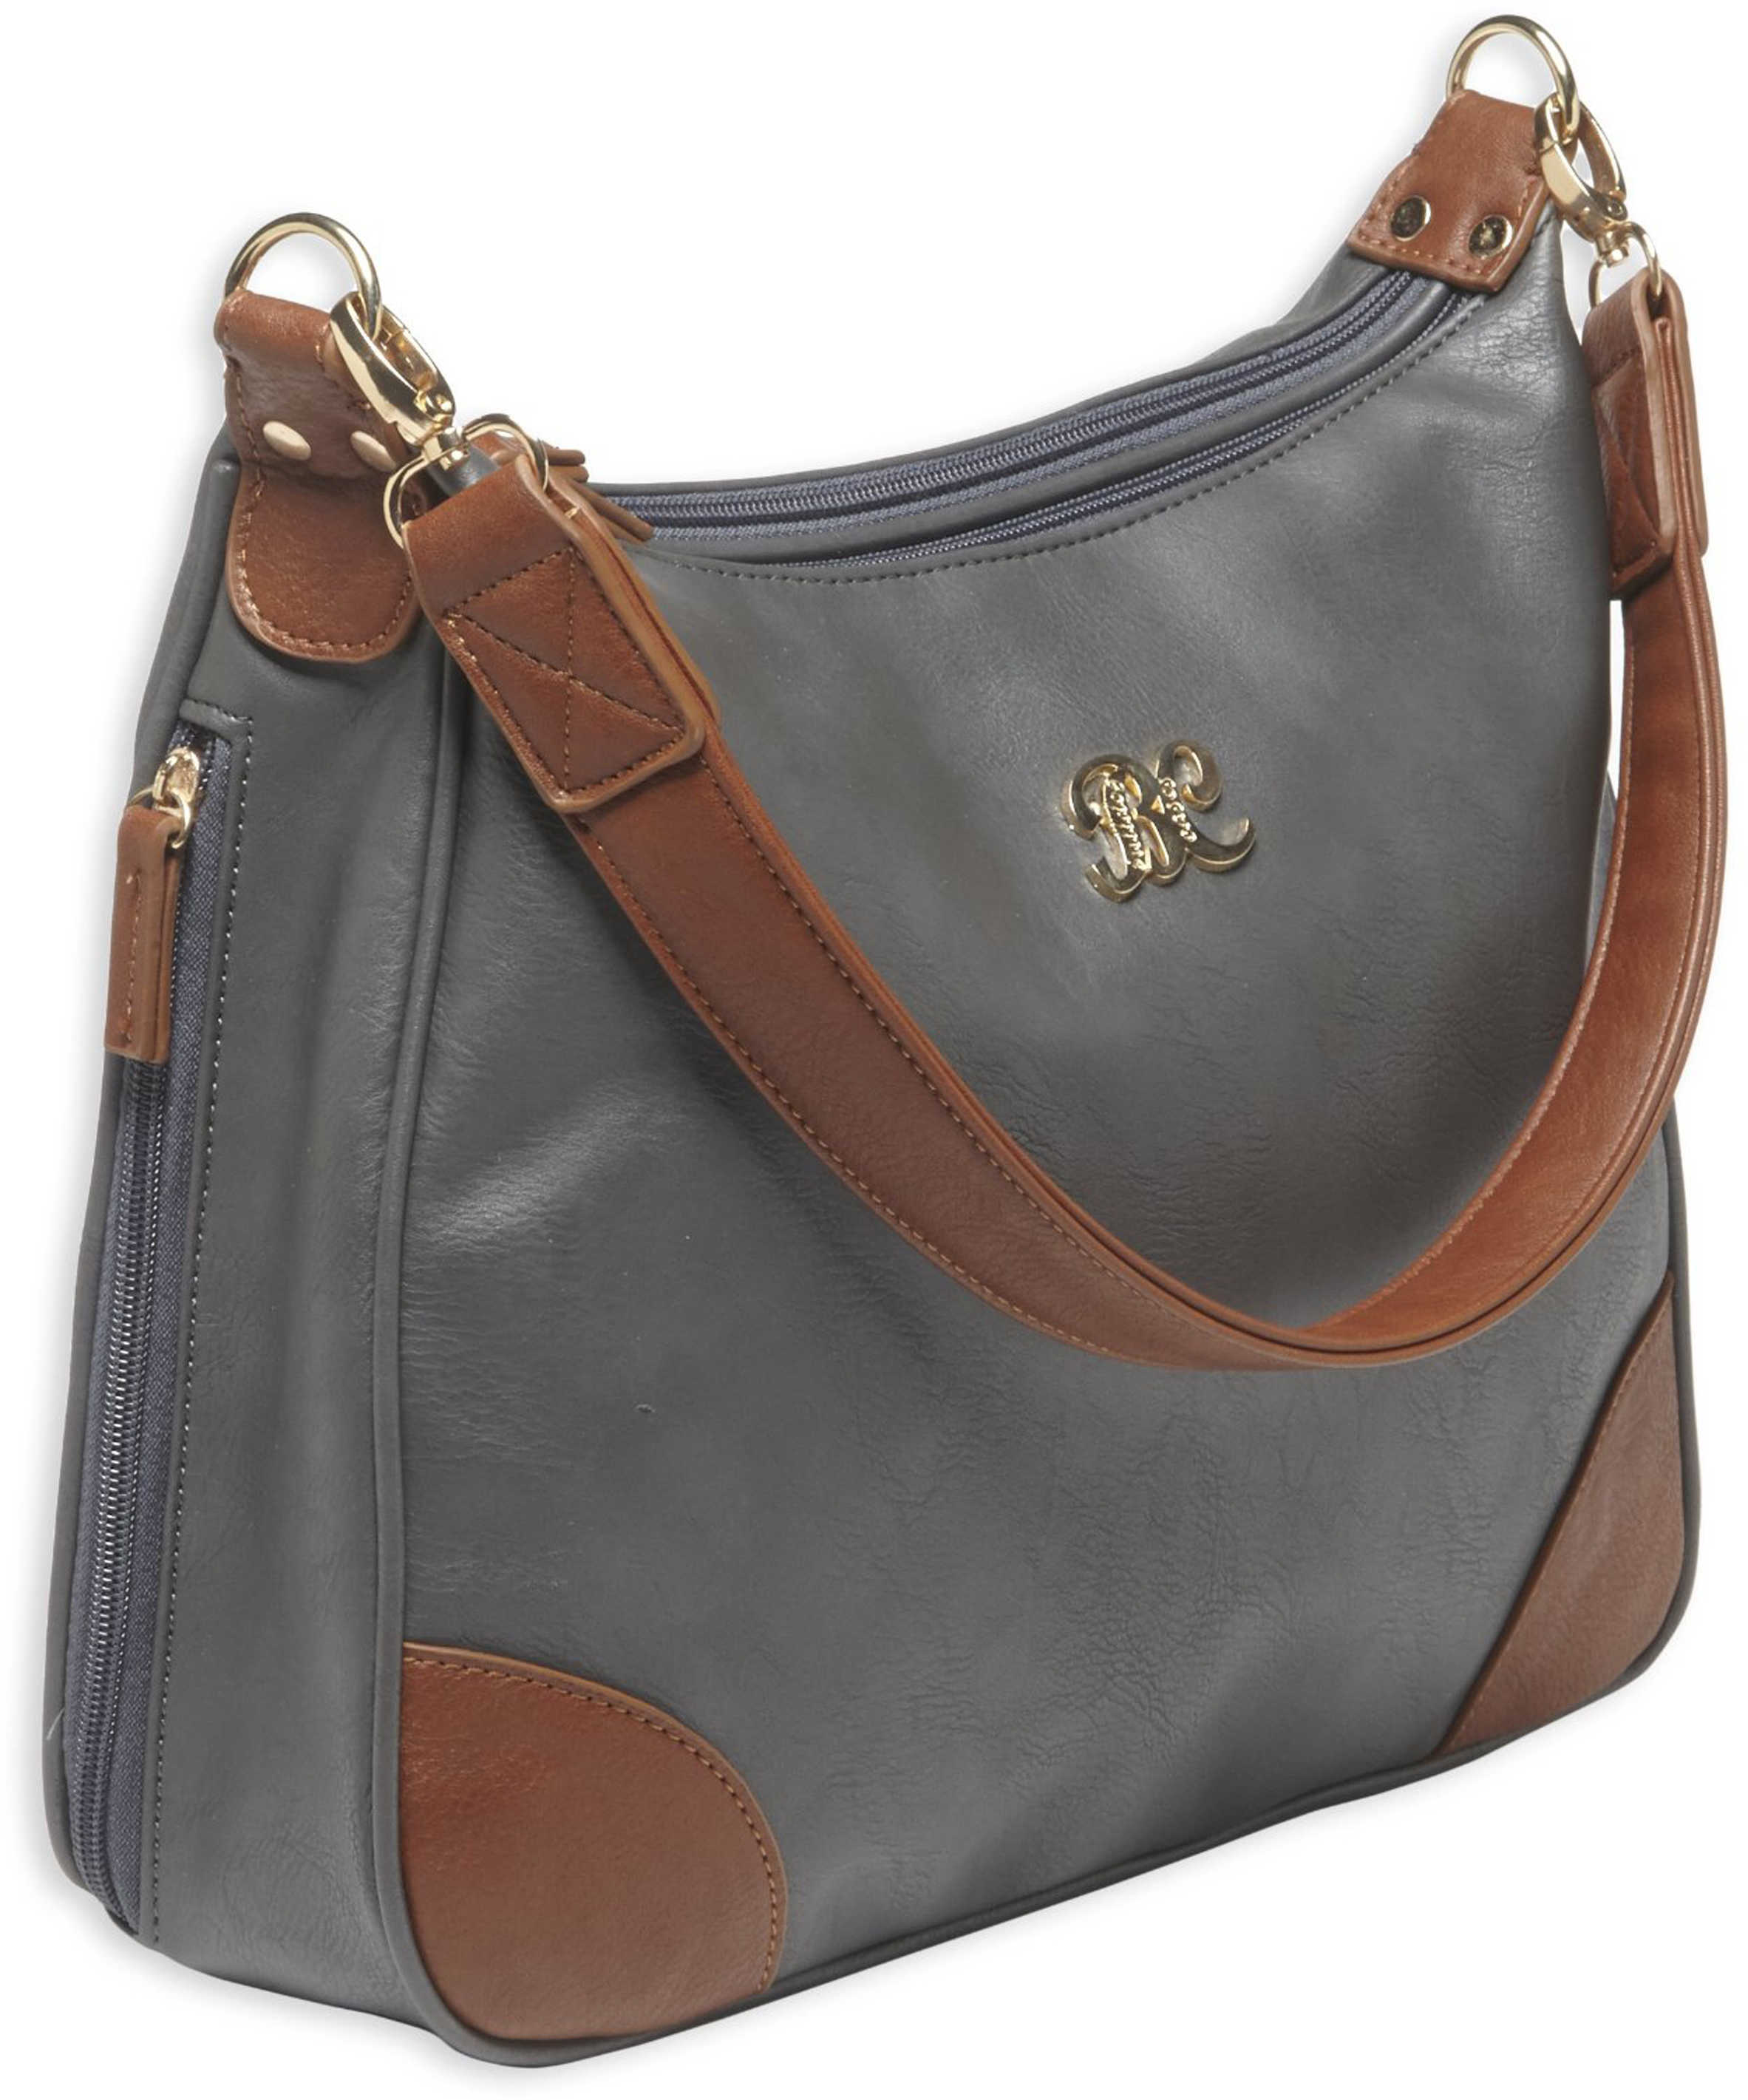 Bulldog Cases Hobo Style Purse w/Holster Grey/Tan Md: BDP-018